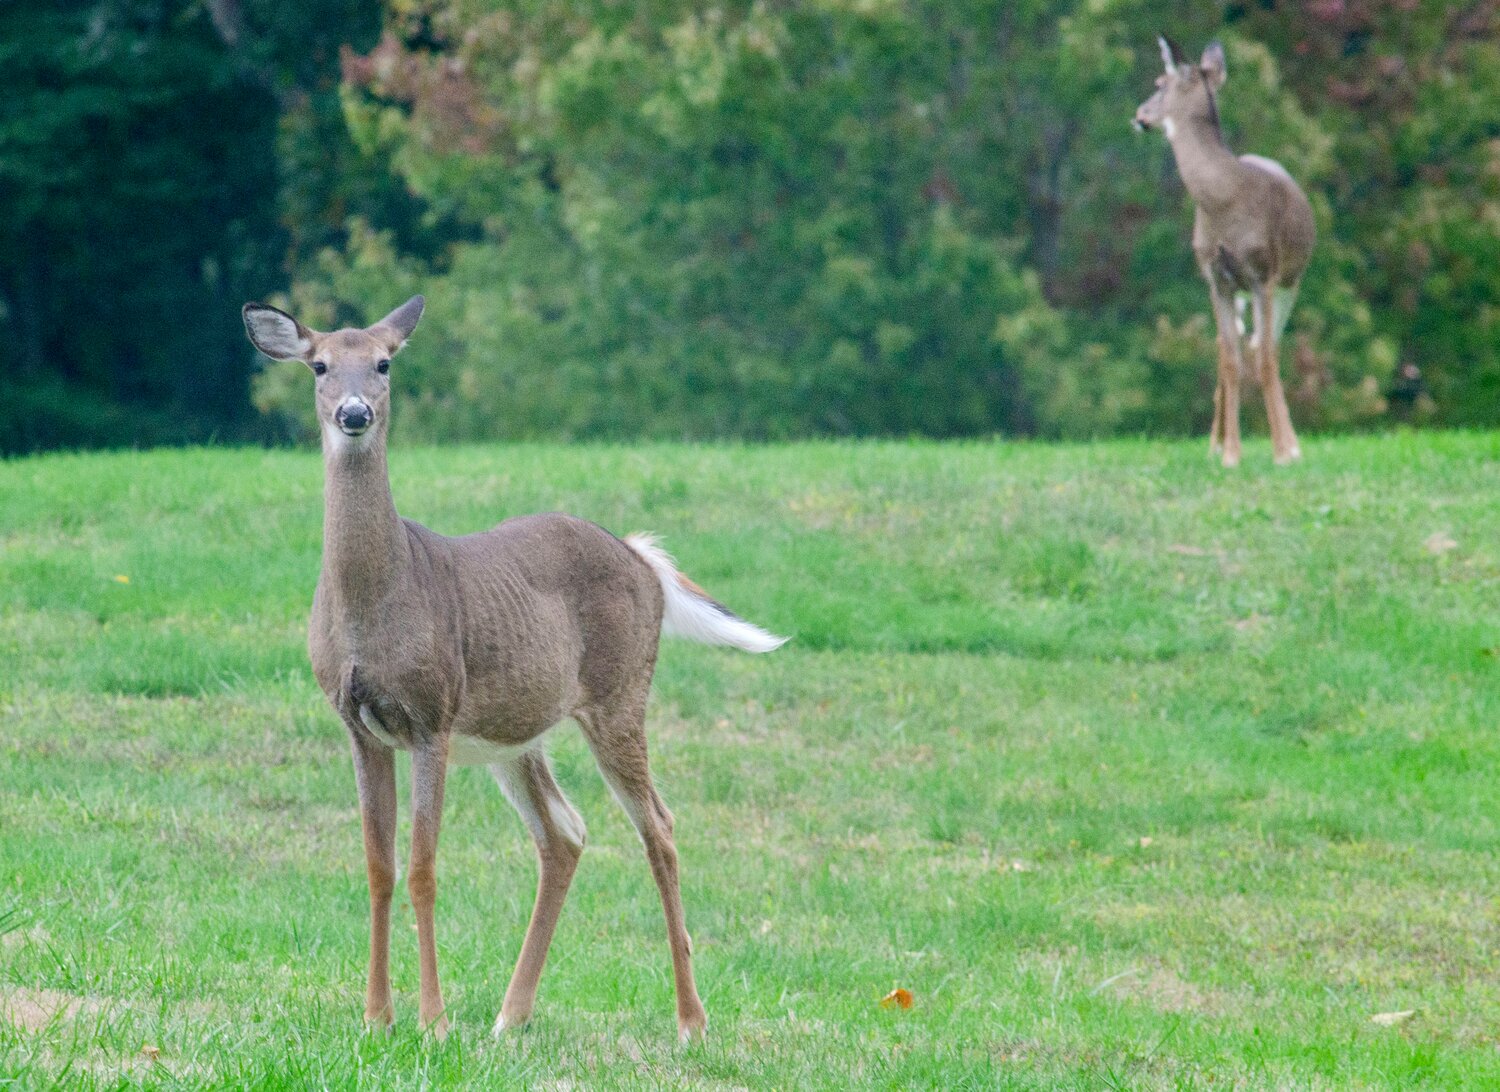 The sheer number of white-tailed deer in the area is causing problems, and residents across Westport and LittleCompton are looking for solutions.